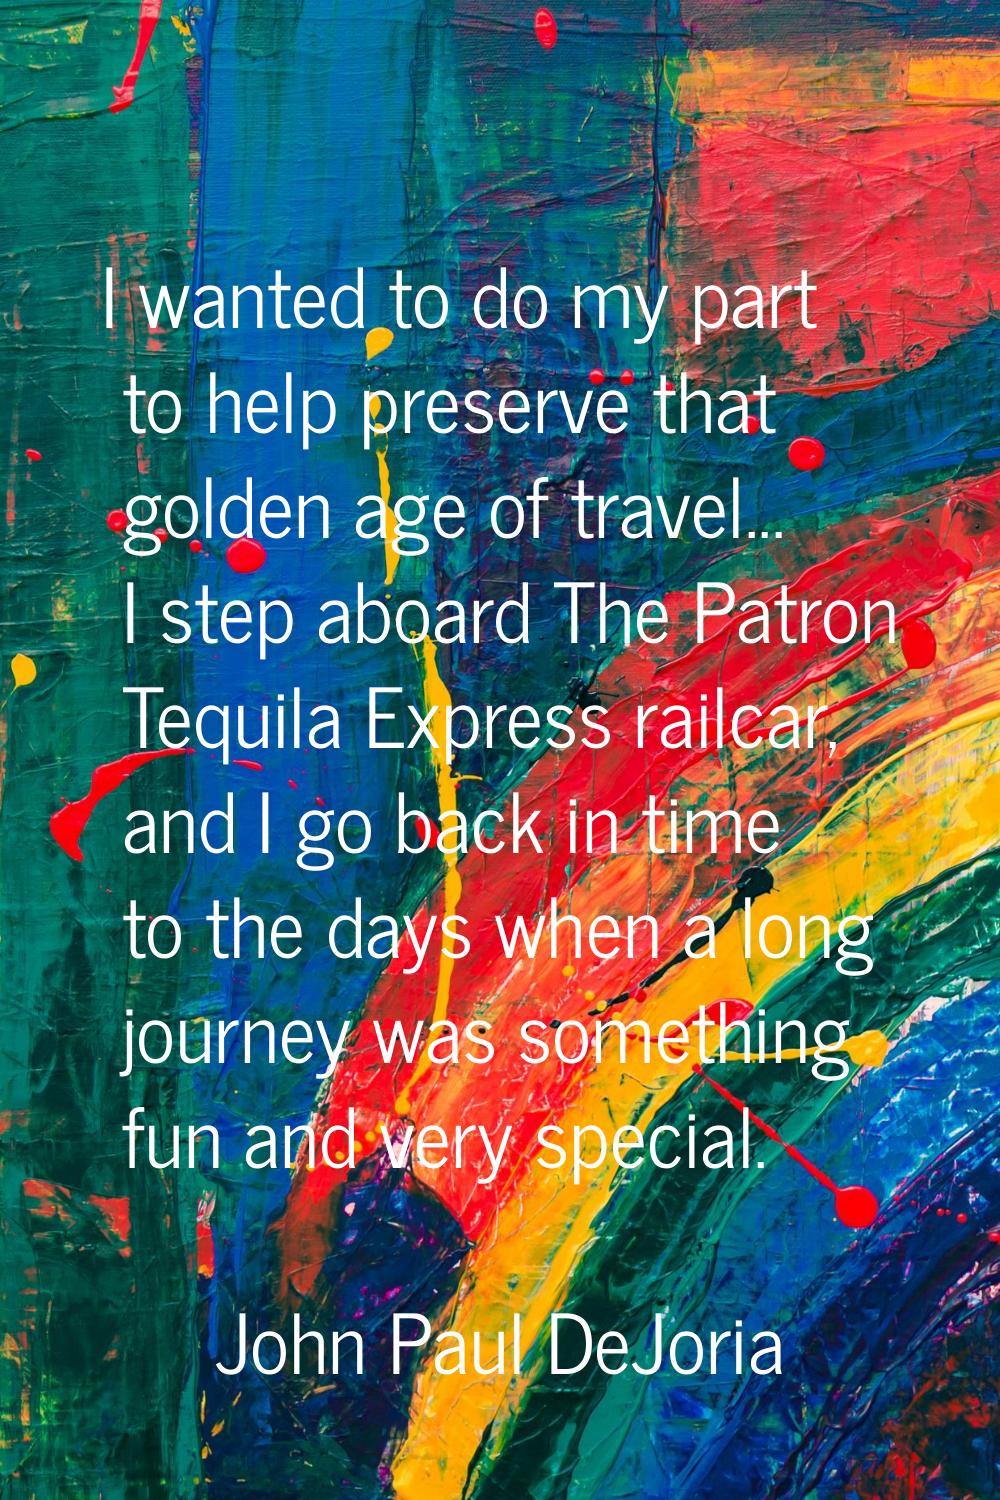 I wanted to do my part to help preserve that golden age of travel... I step aboard The Patron Tequi